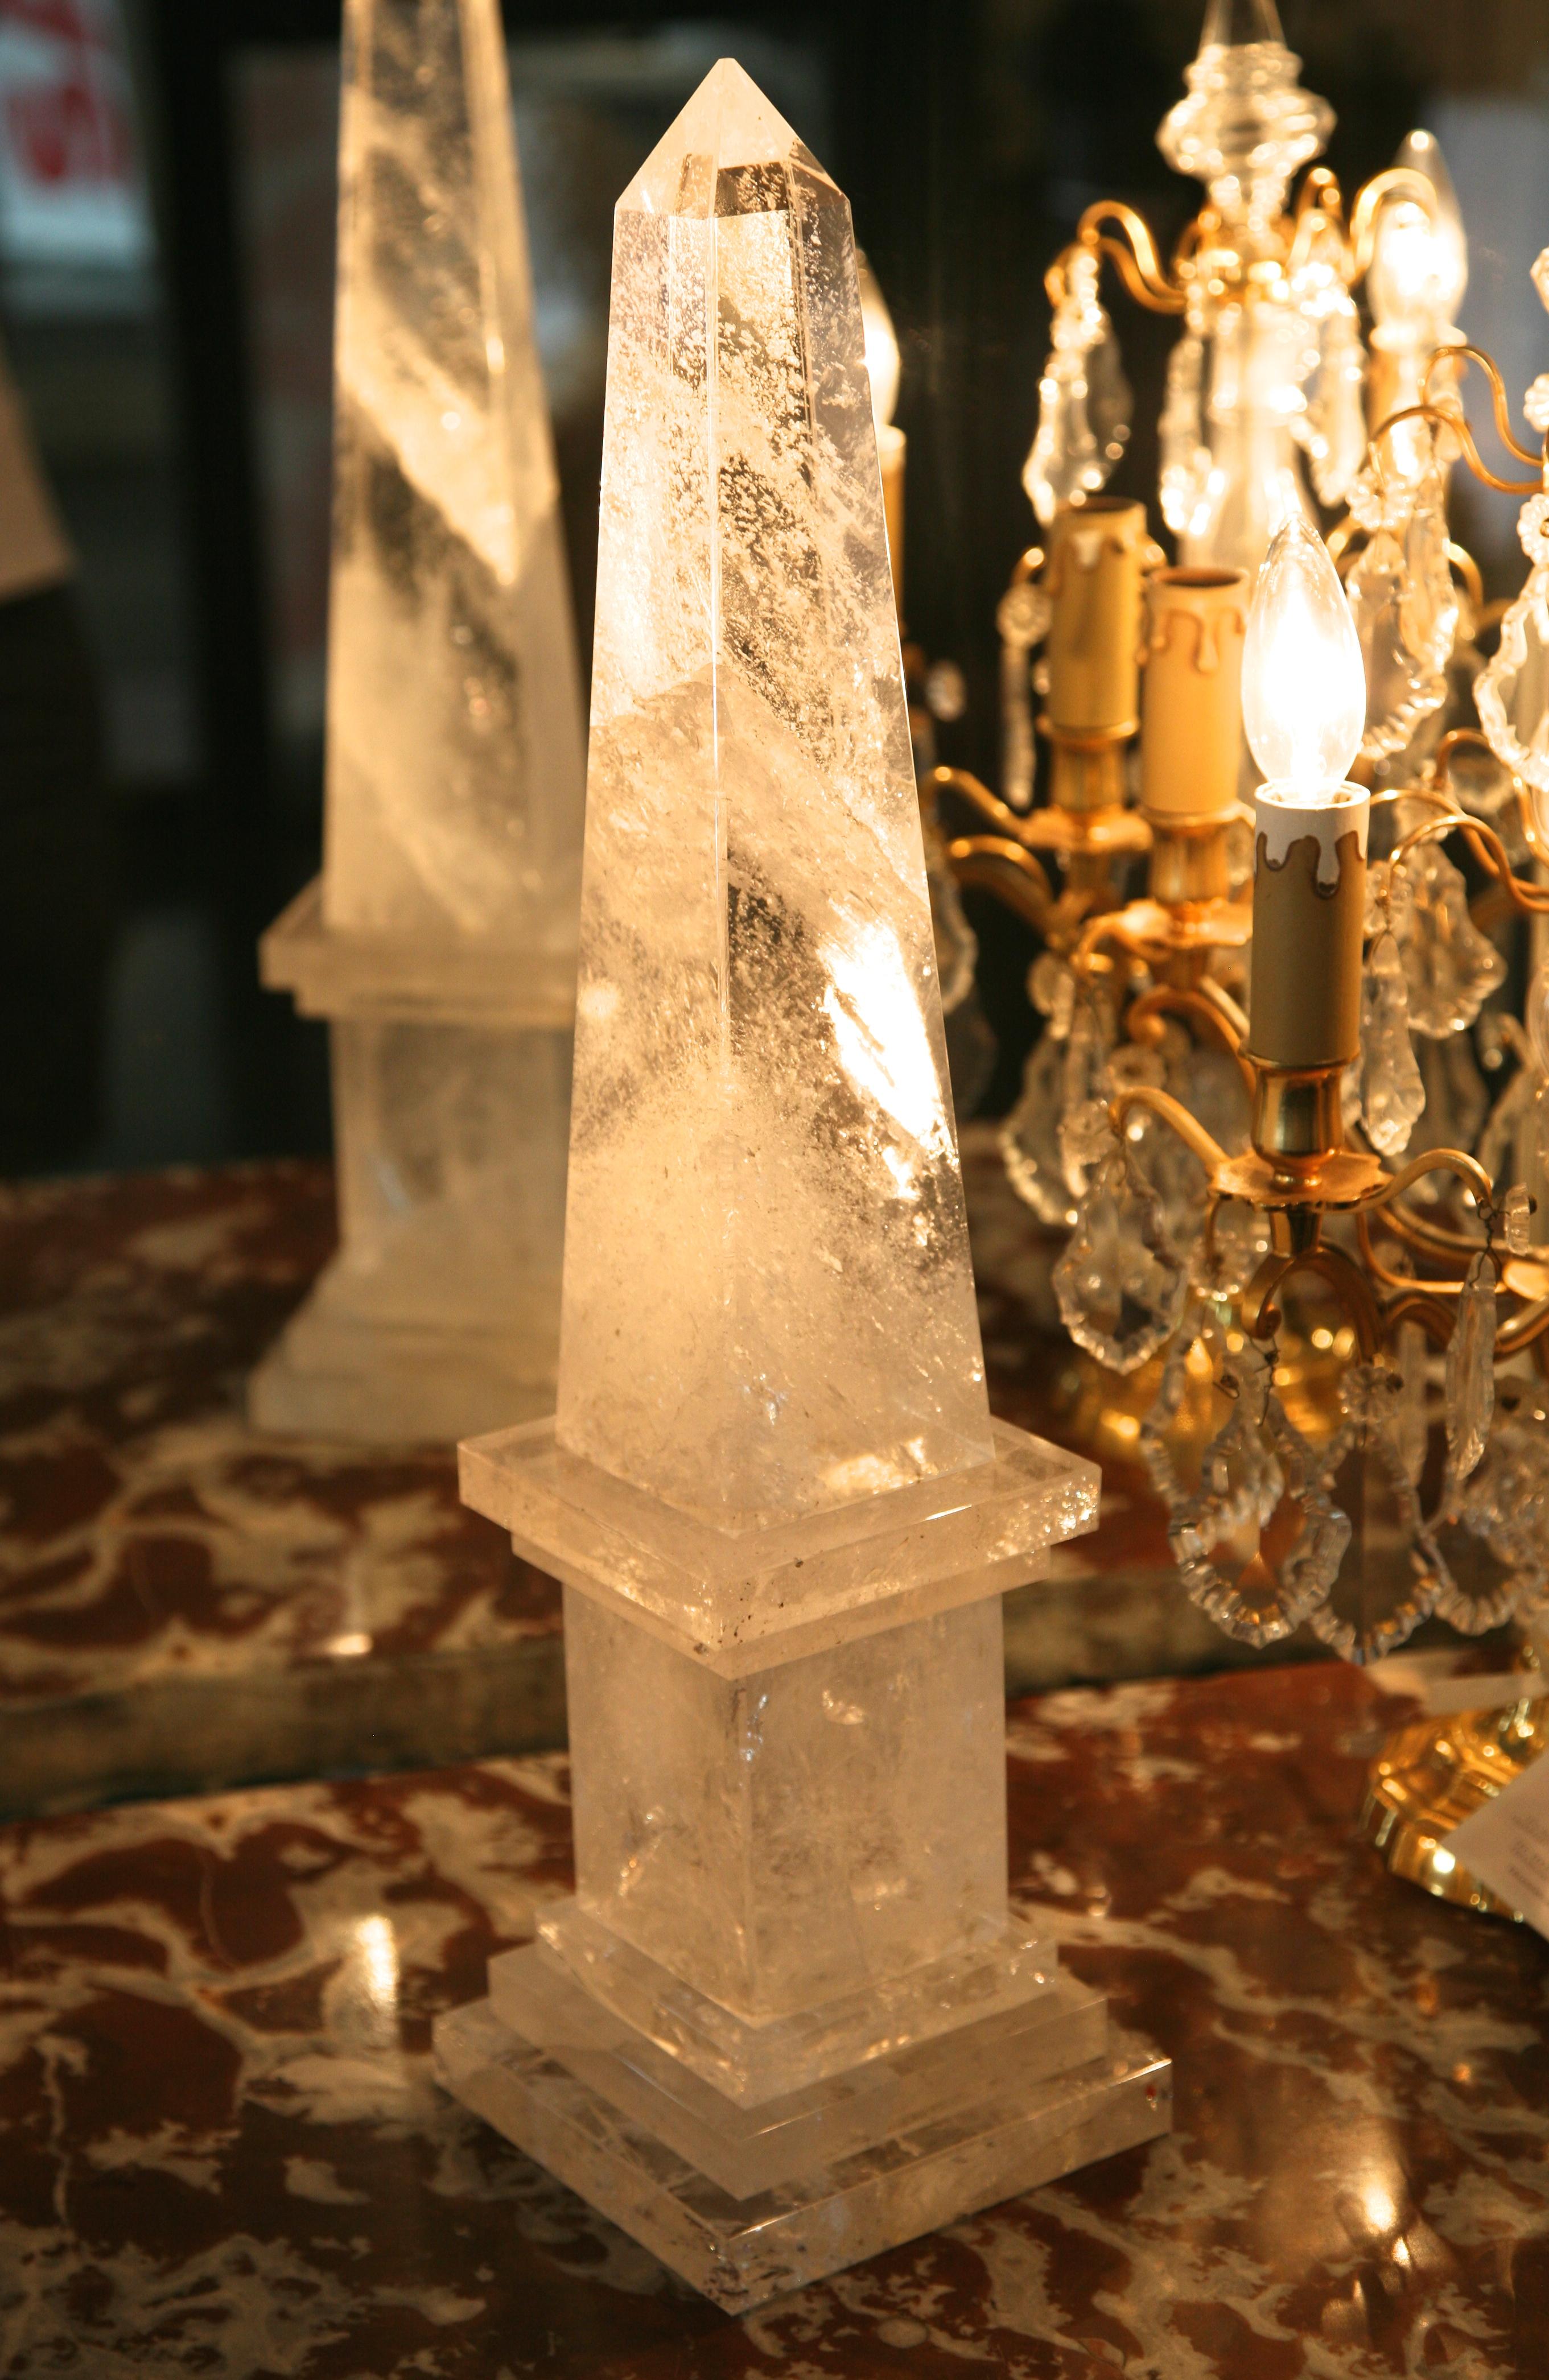 Fine large pair of neoclassical rock crystal obelisks with square base. Very harmonious proportions, exquisite clarity, French, early 20th century.
An architectural pair of decorative, Mid-Century Modern, Neoclassical Rock Crystal obelisks upon